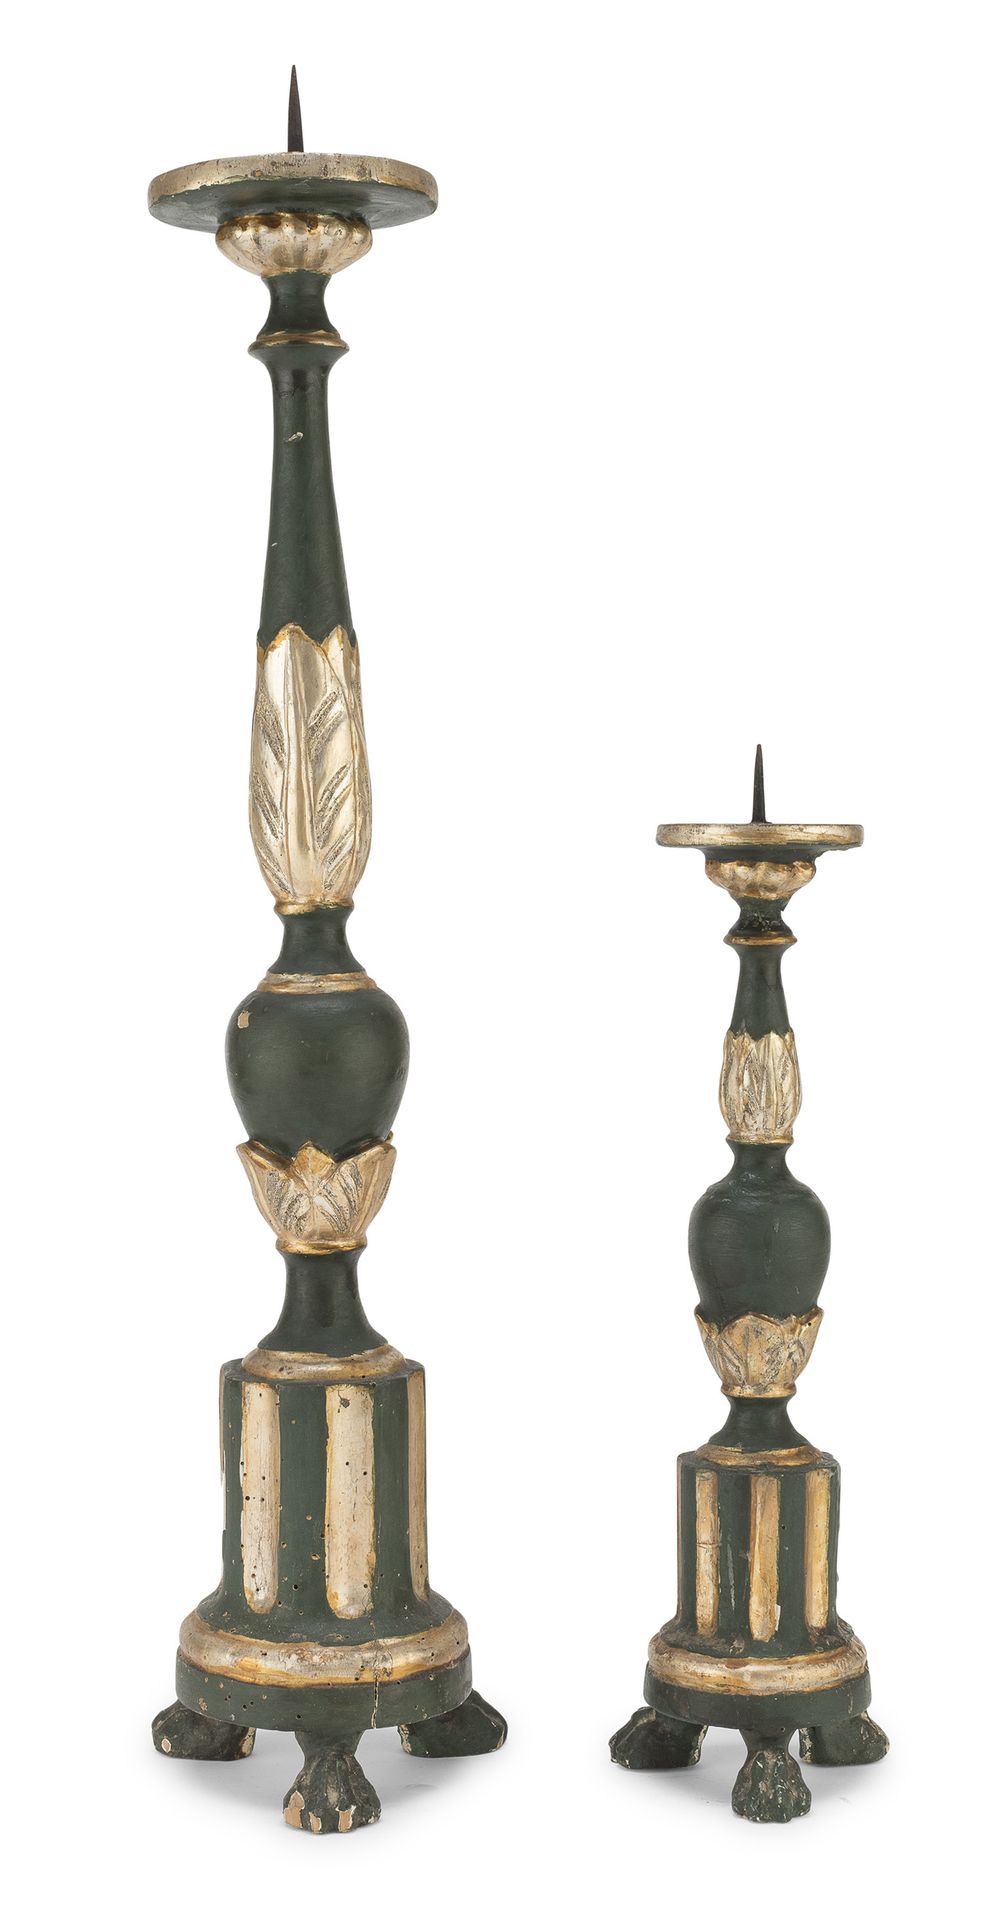 Null TWO CANDLESTICKS IN LACQUERED WOOD, LATE 18th CENTURY